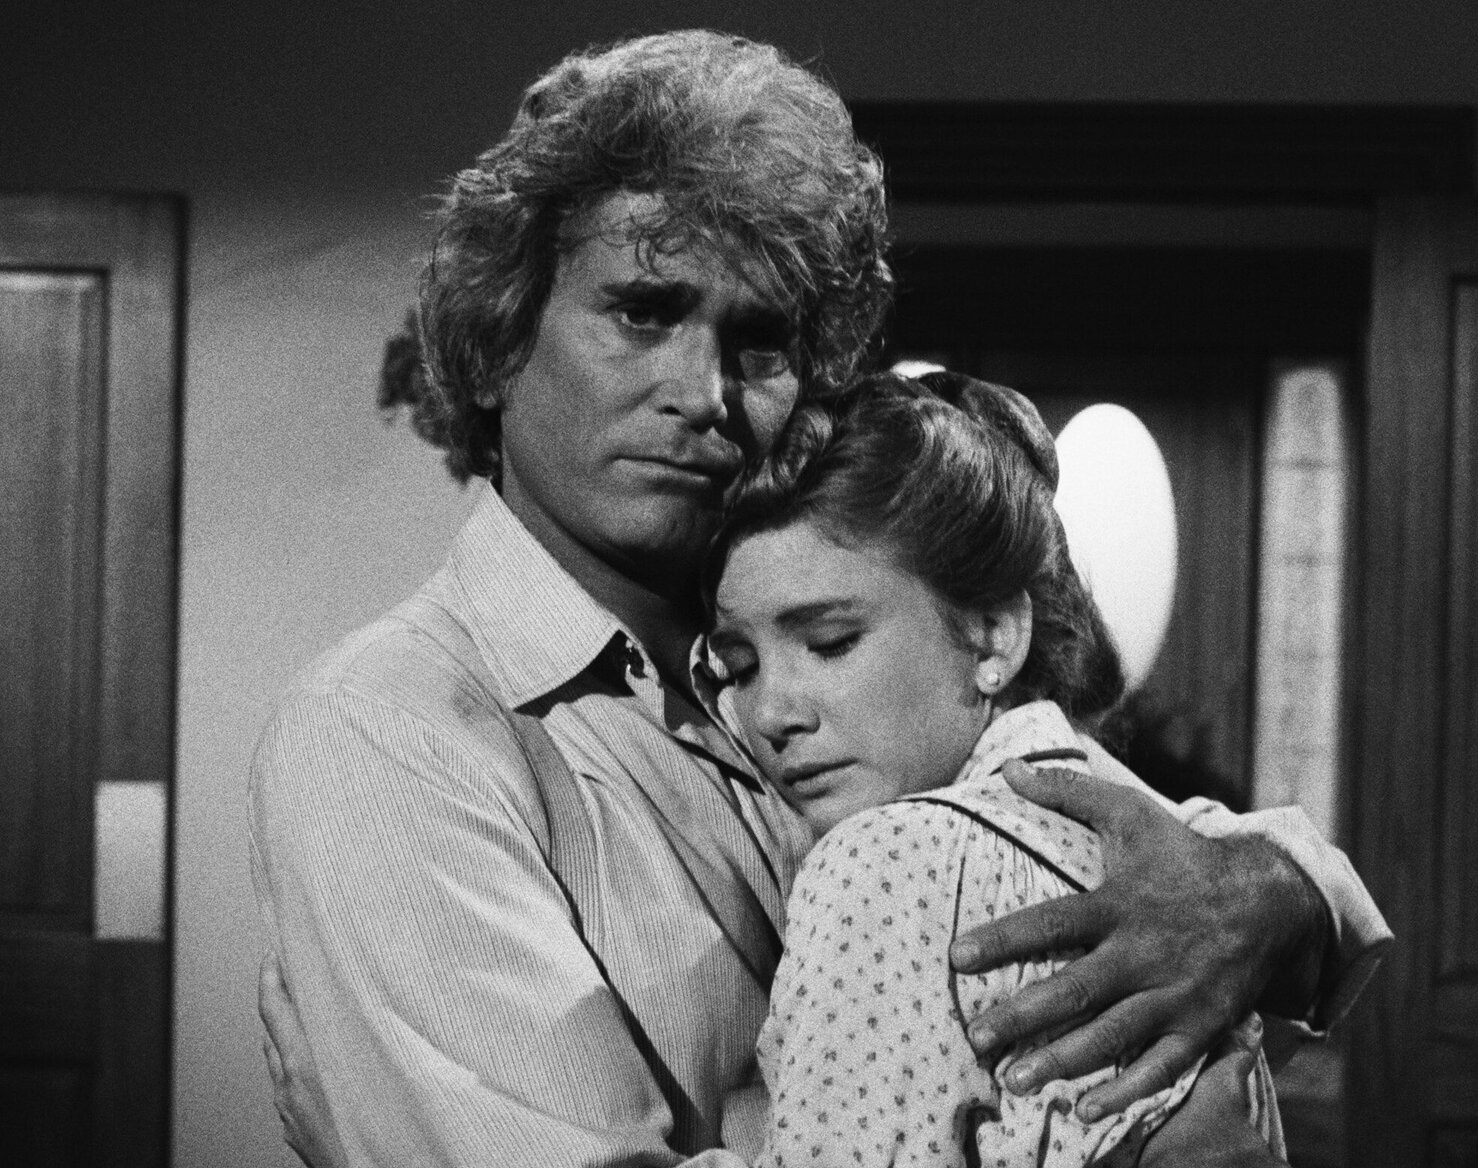 Michael Landon hugging Melissa Gilbert in black and white. A still from 'Little House: A New Beginning'